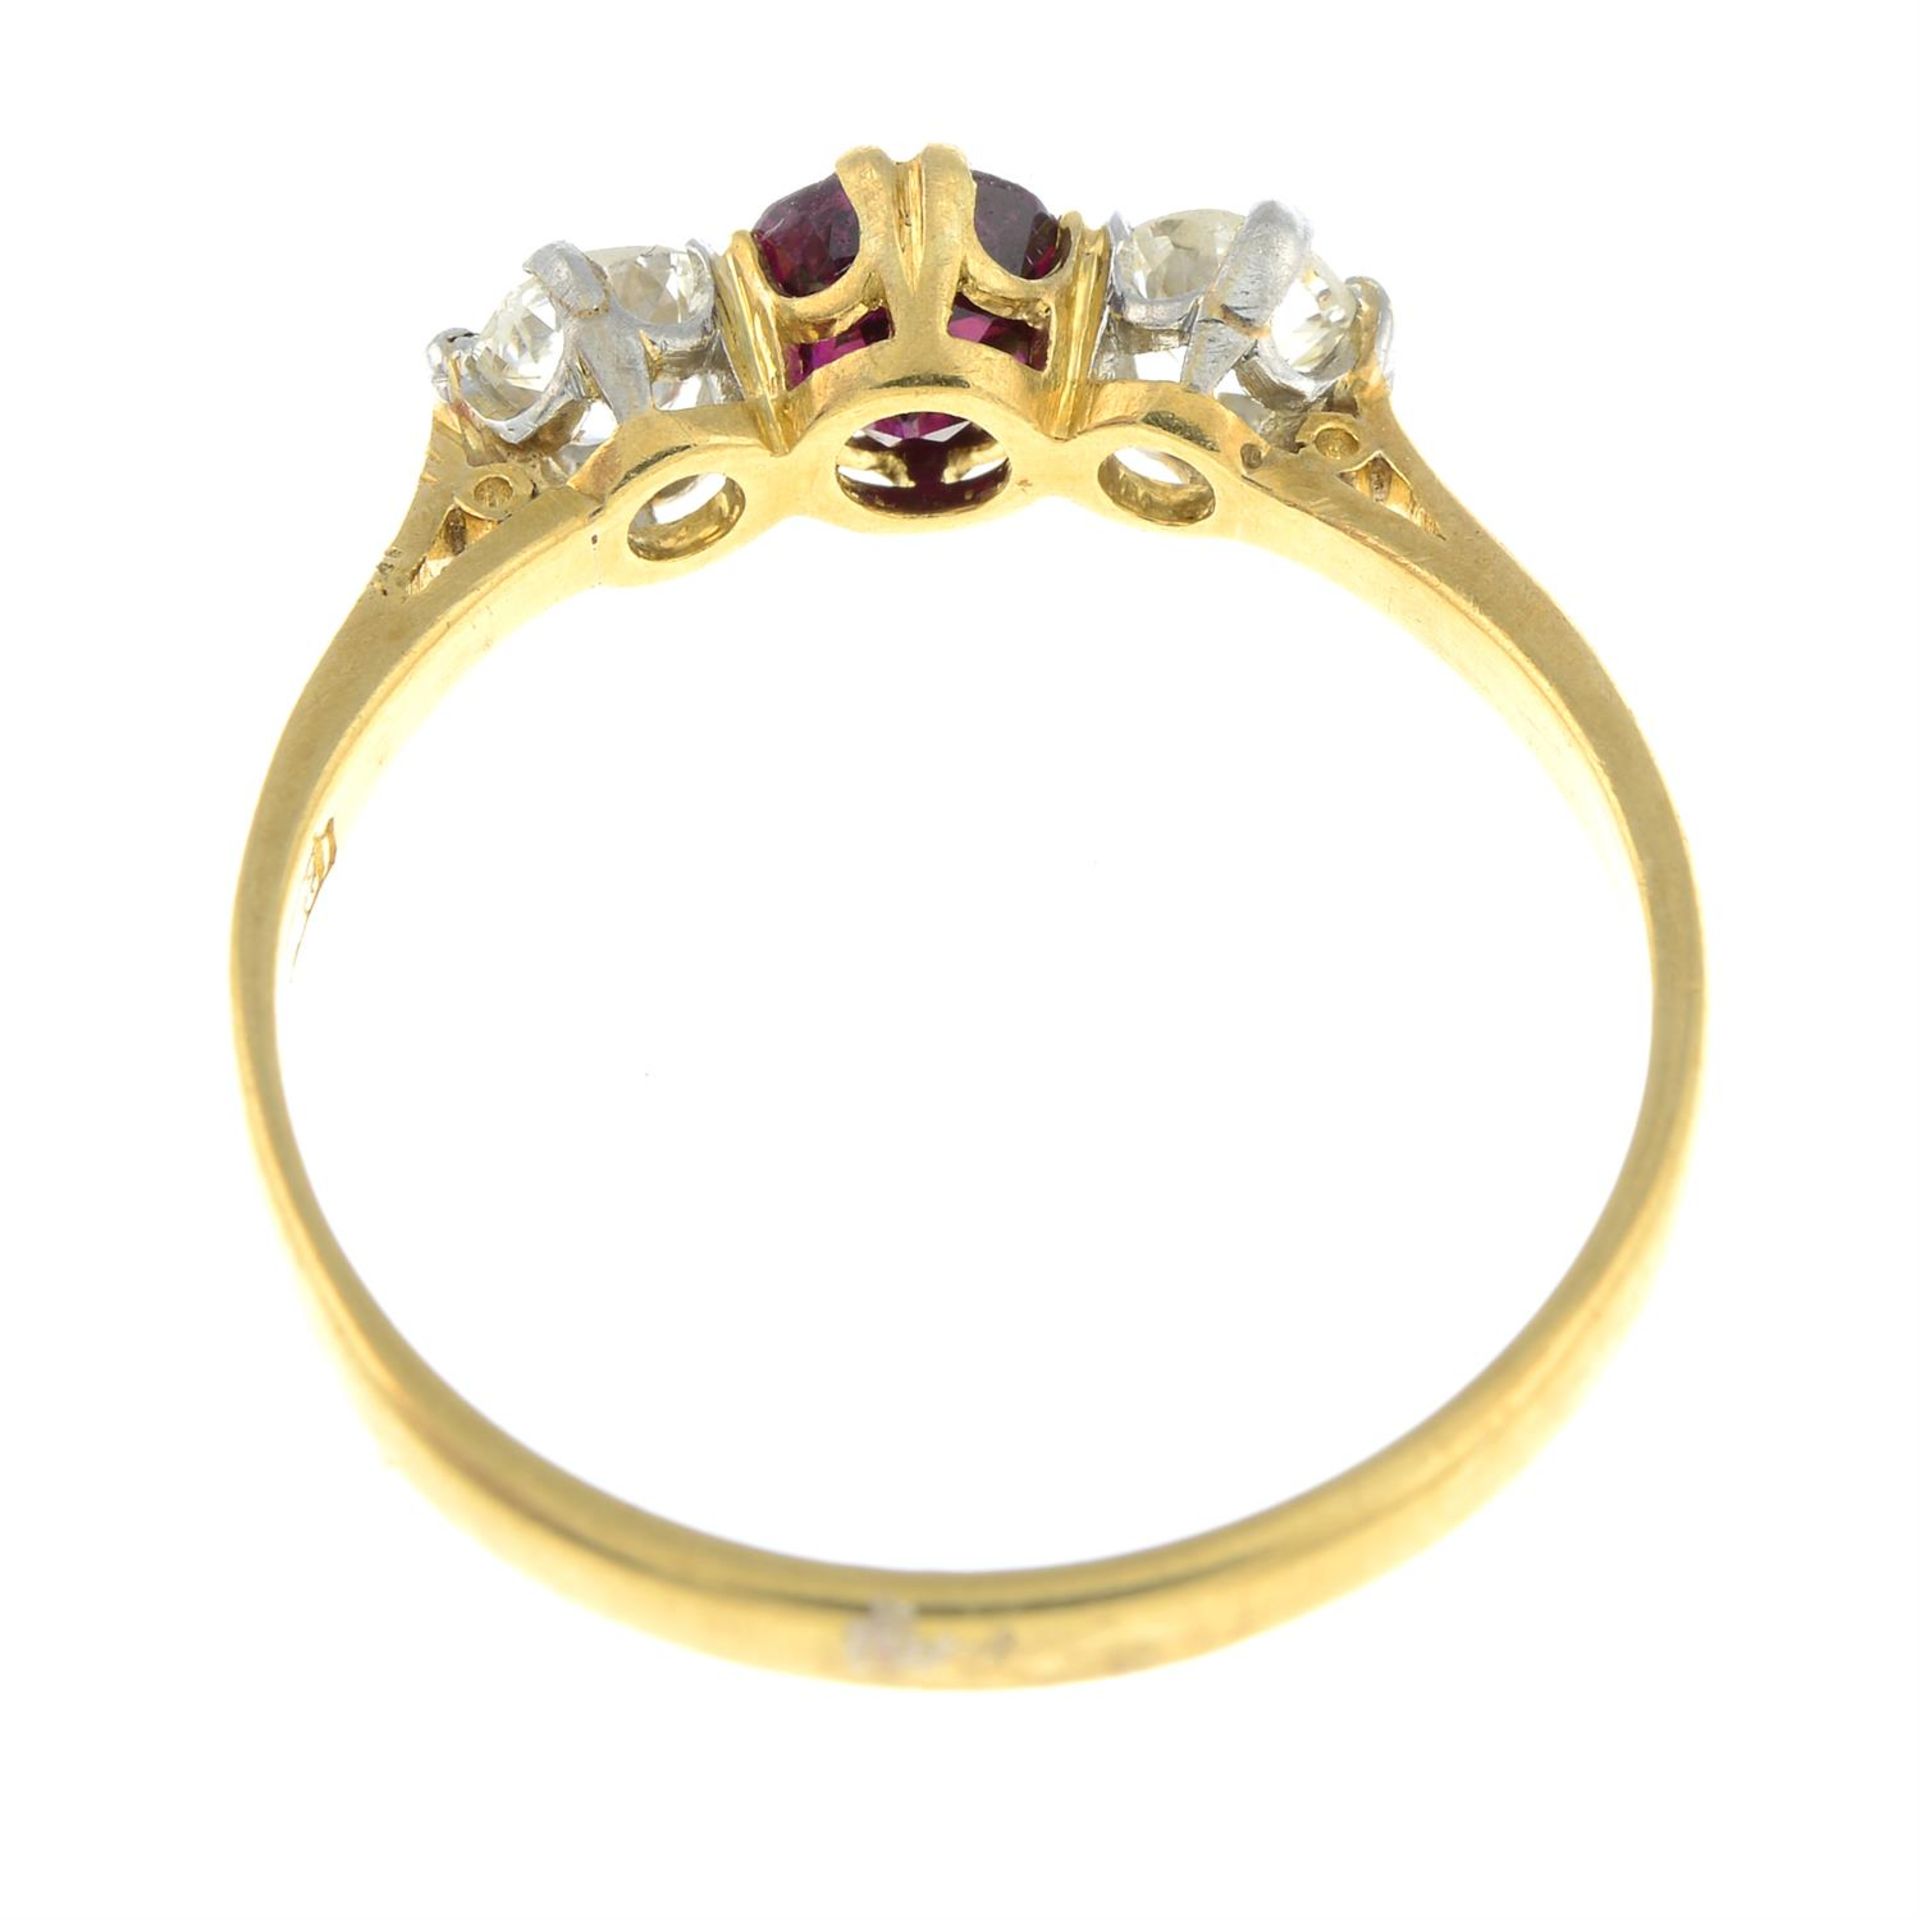 An early to mid 20th century 18ct gold ruby and old-cut diamond three-stone ring. - Image 2 of 2